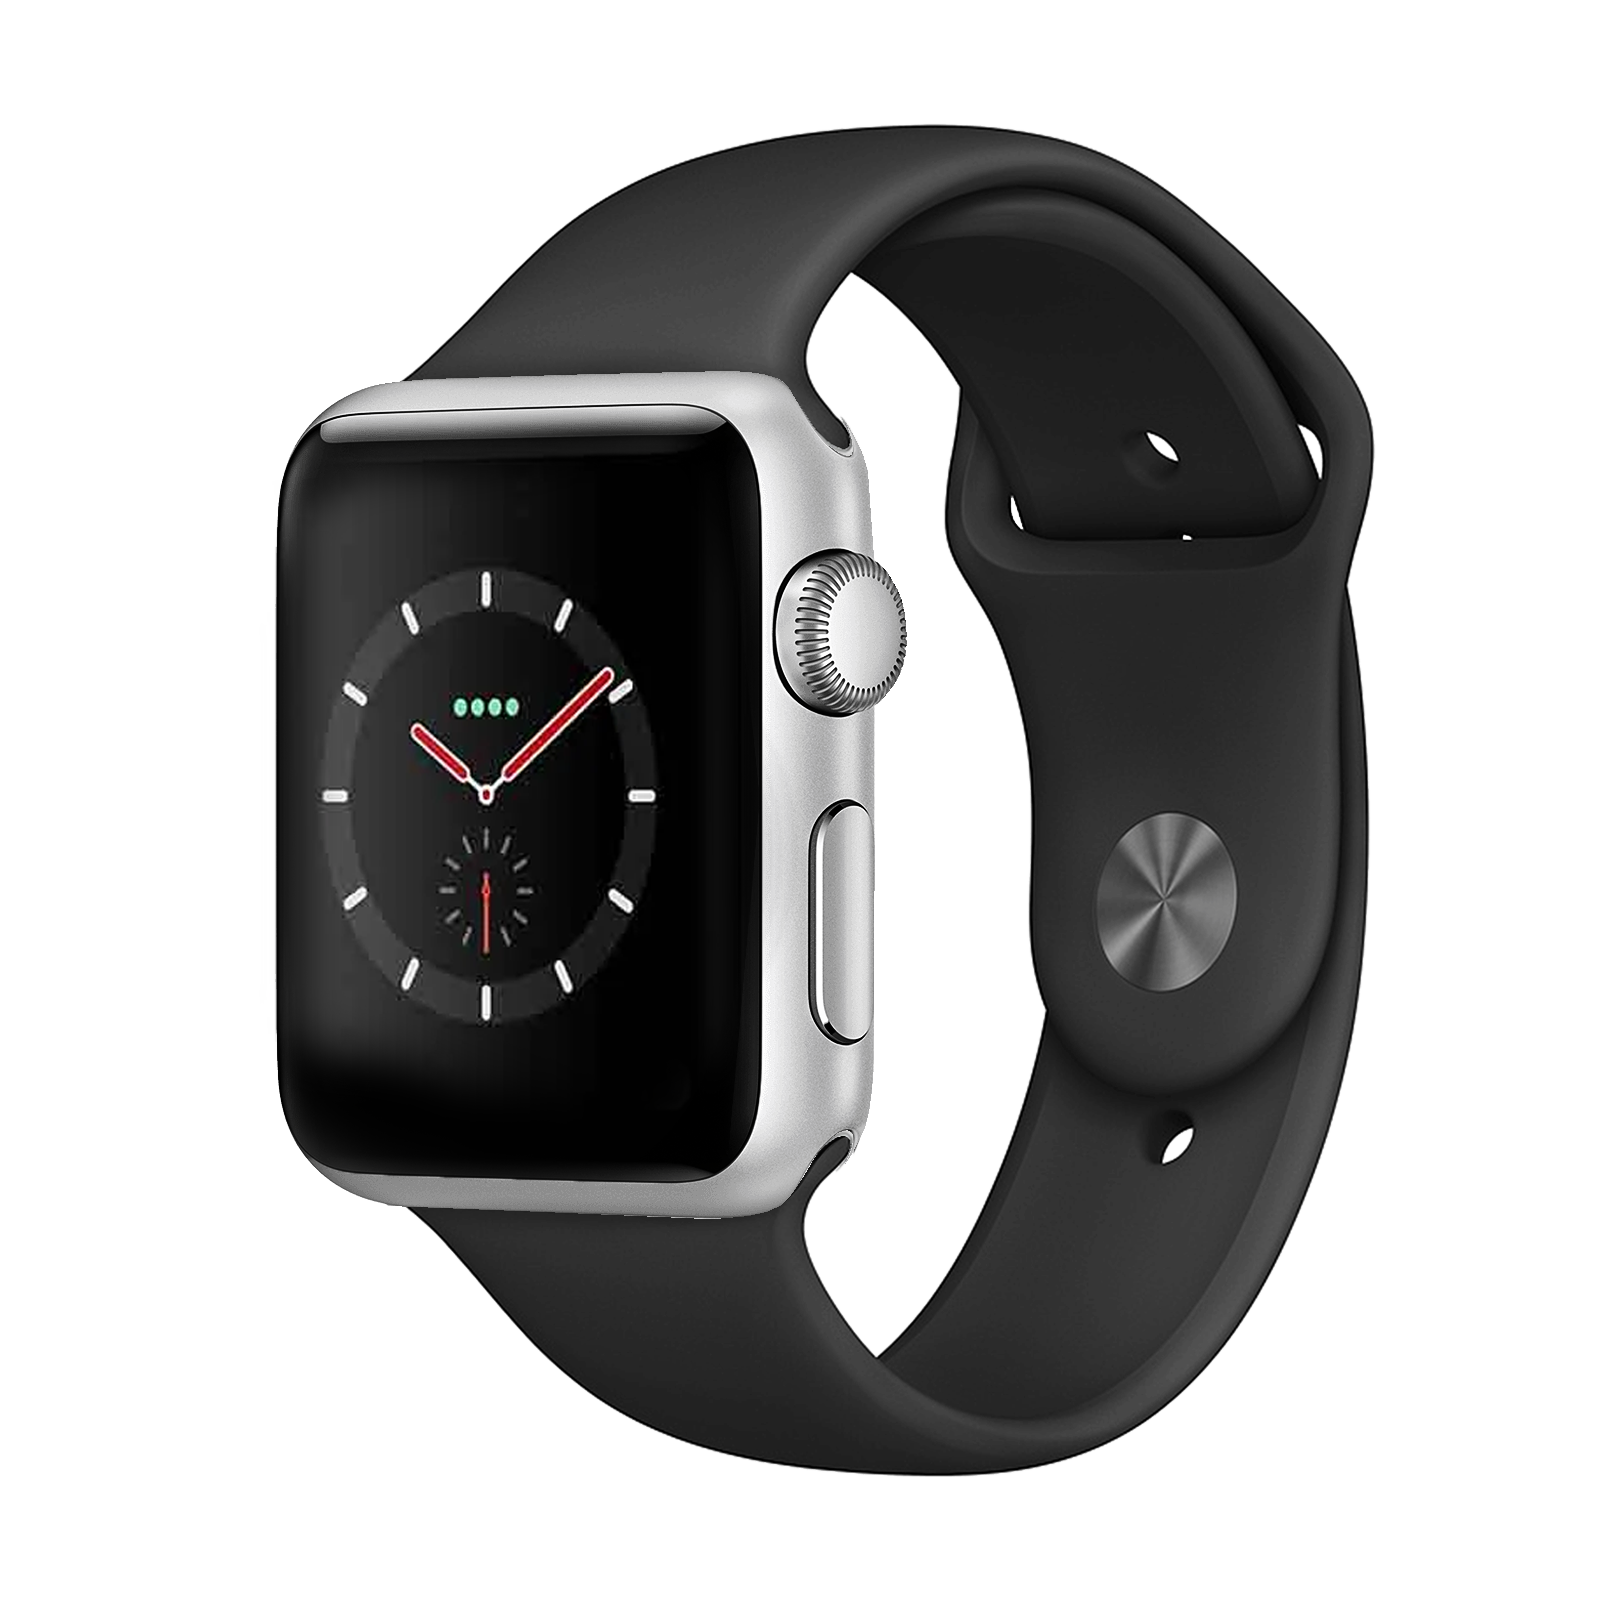 Apple Watch Series 3 Stainless 42mm Silver Good - WiFi